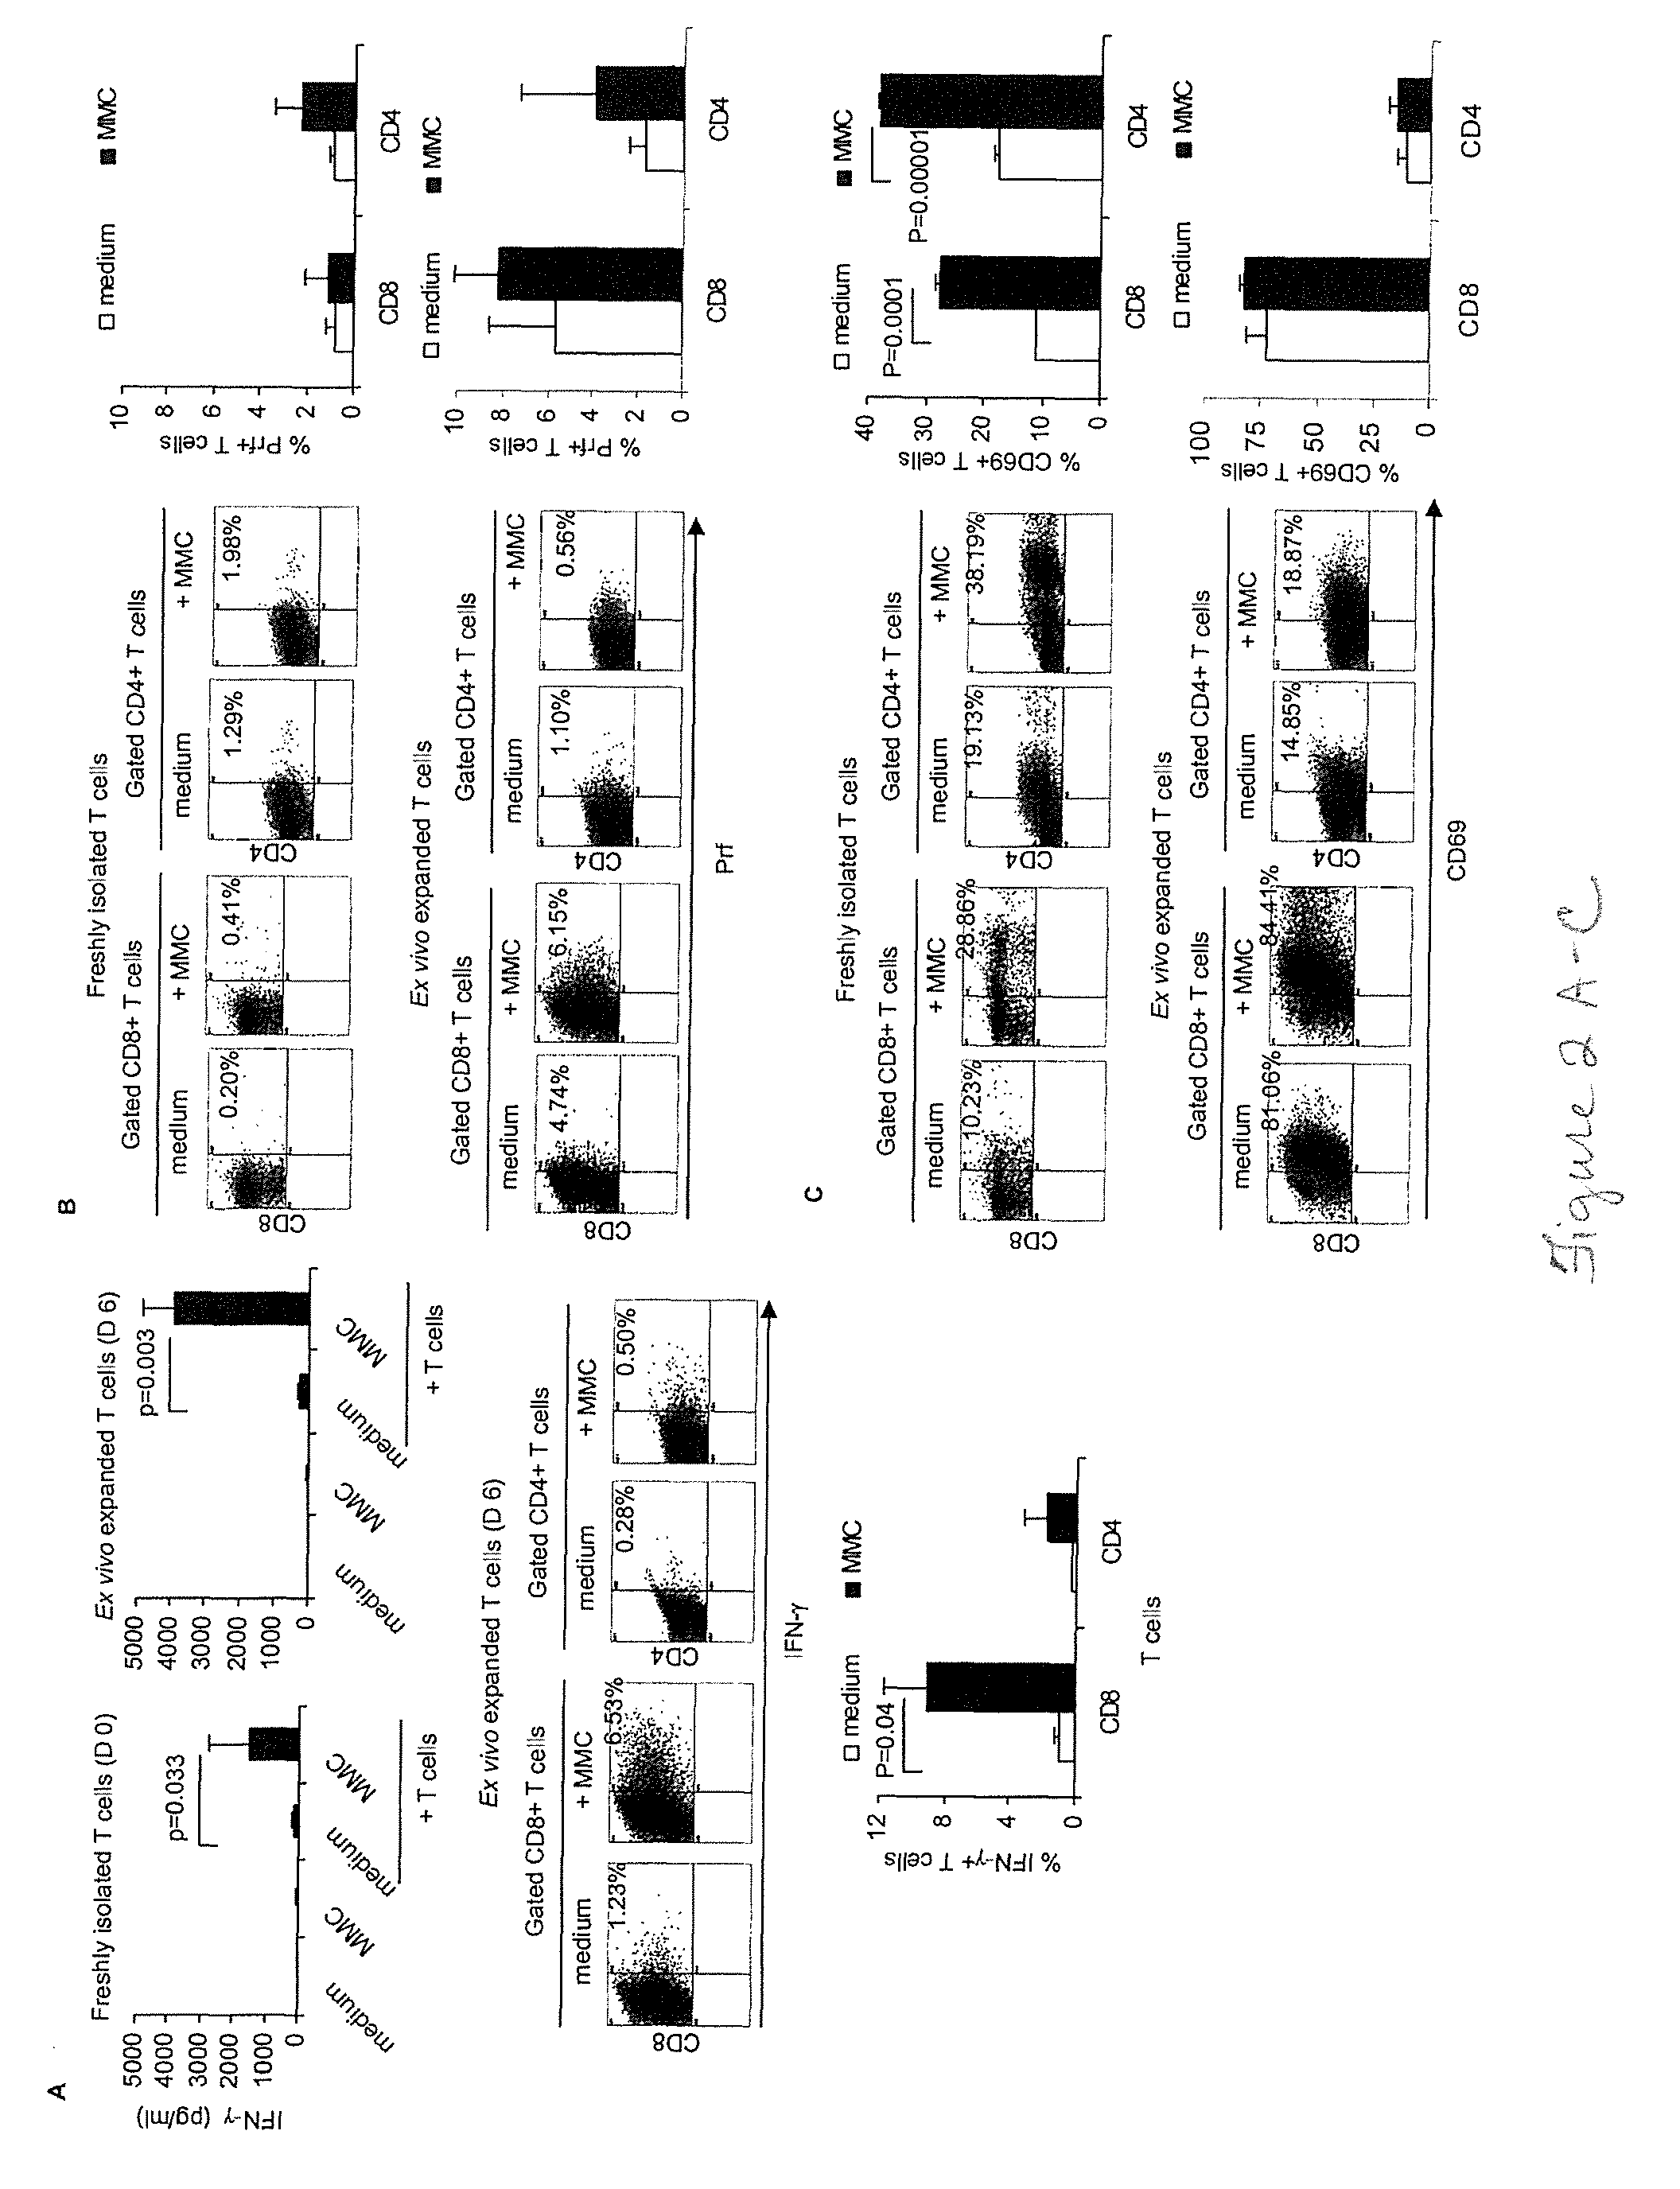 Methods for producing autologous immune cells resistant to myeloid-derived suppressor cells effects